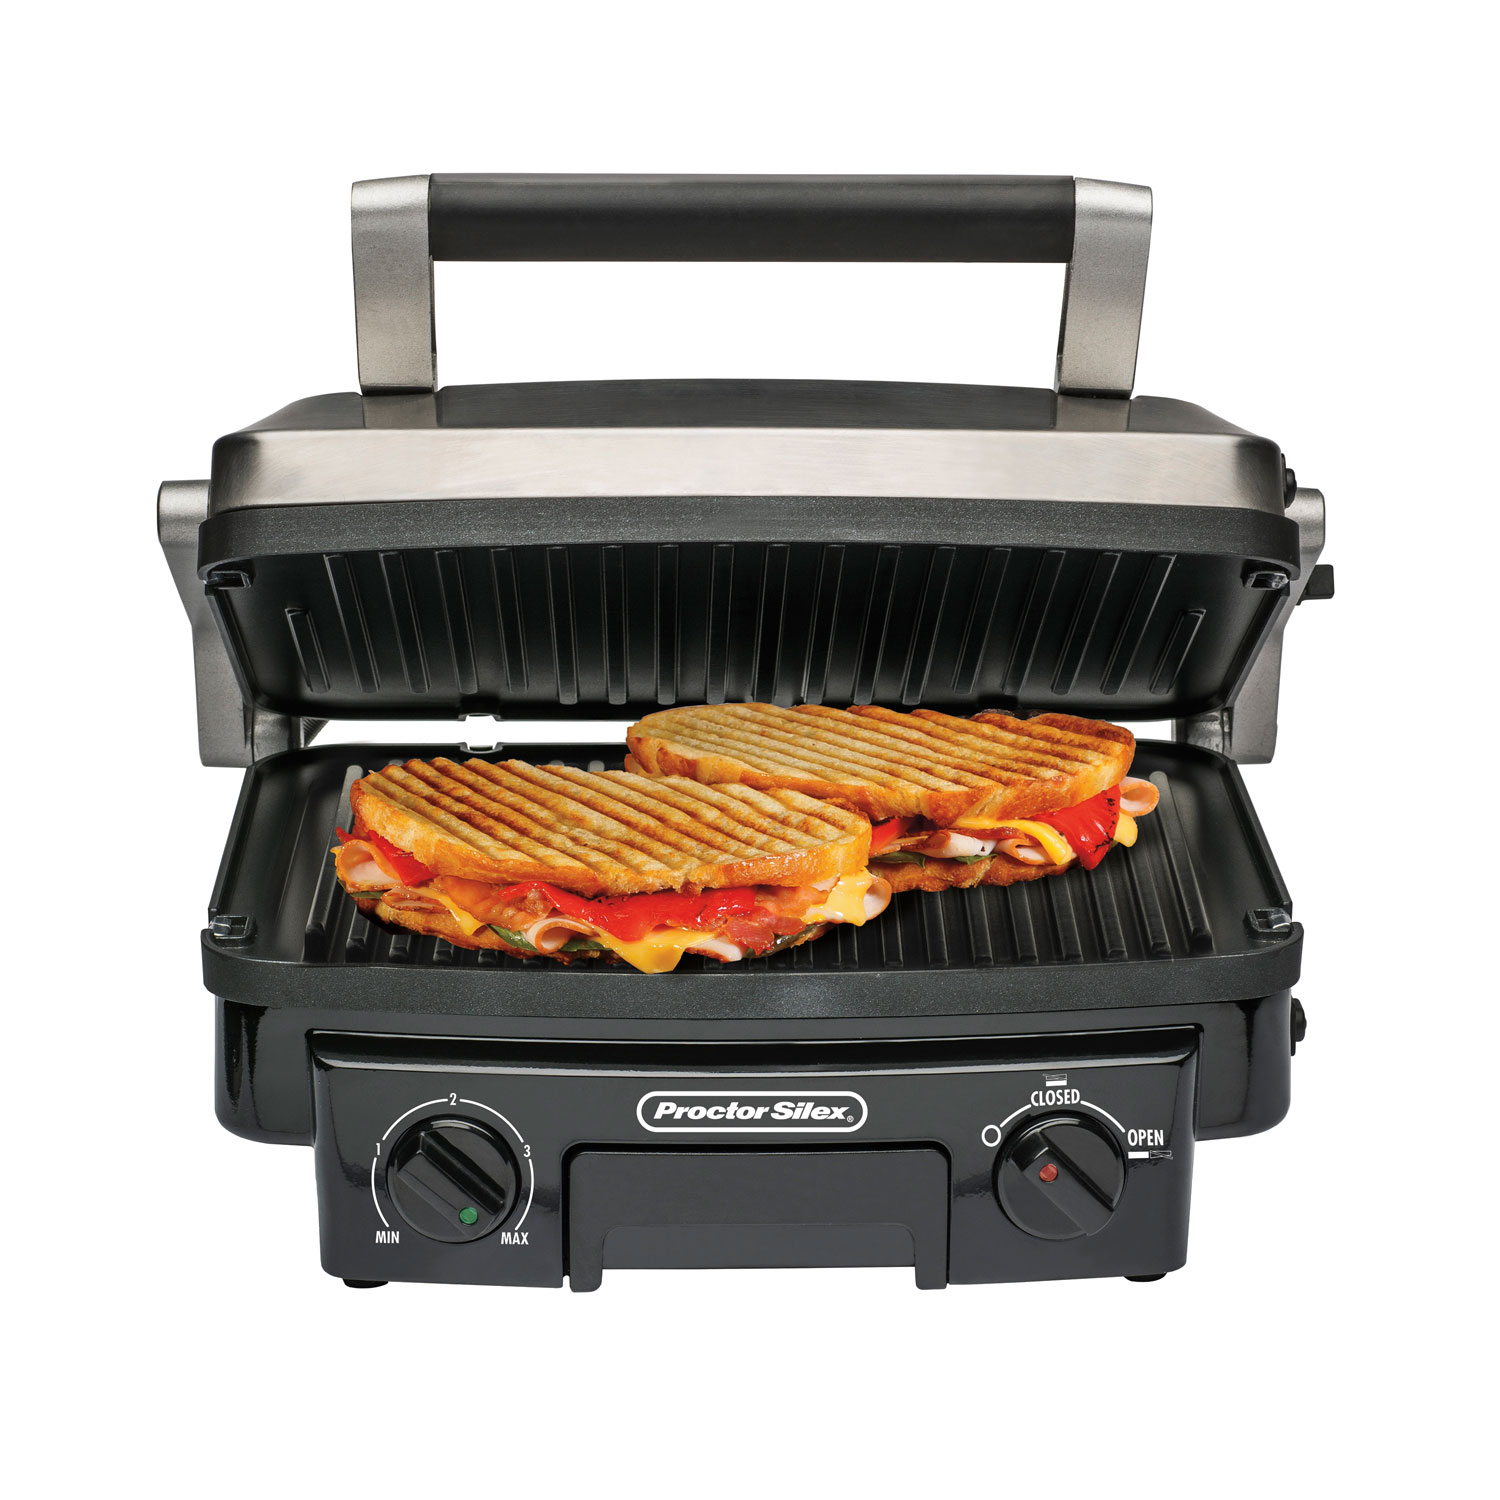 5-in-1 Grill with Griddle - 25340R Small Size